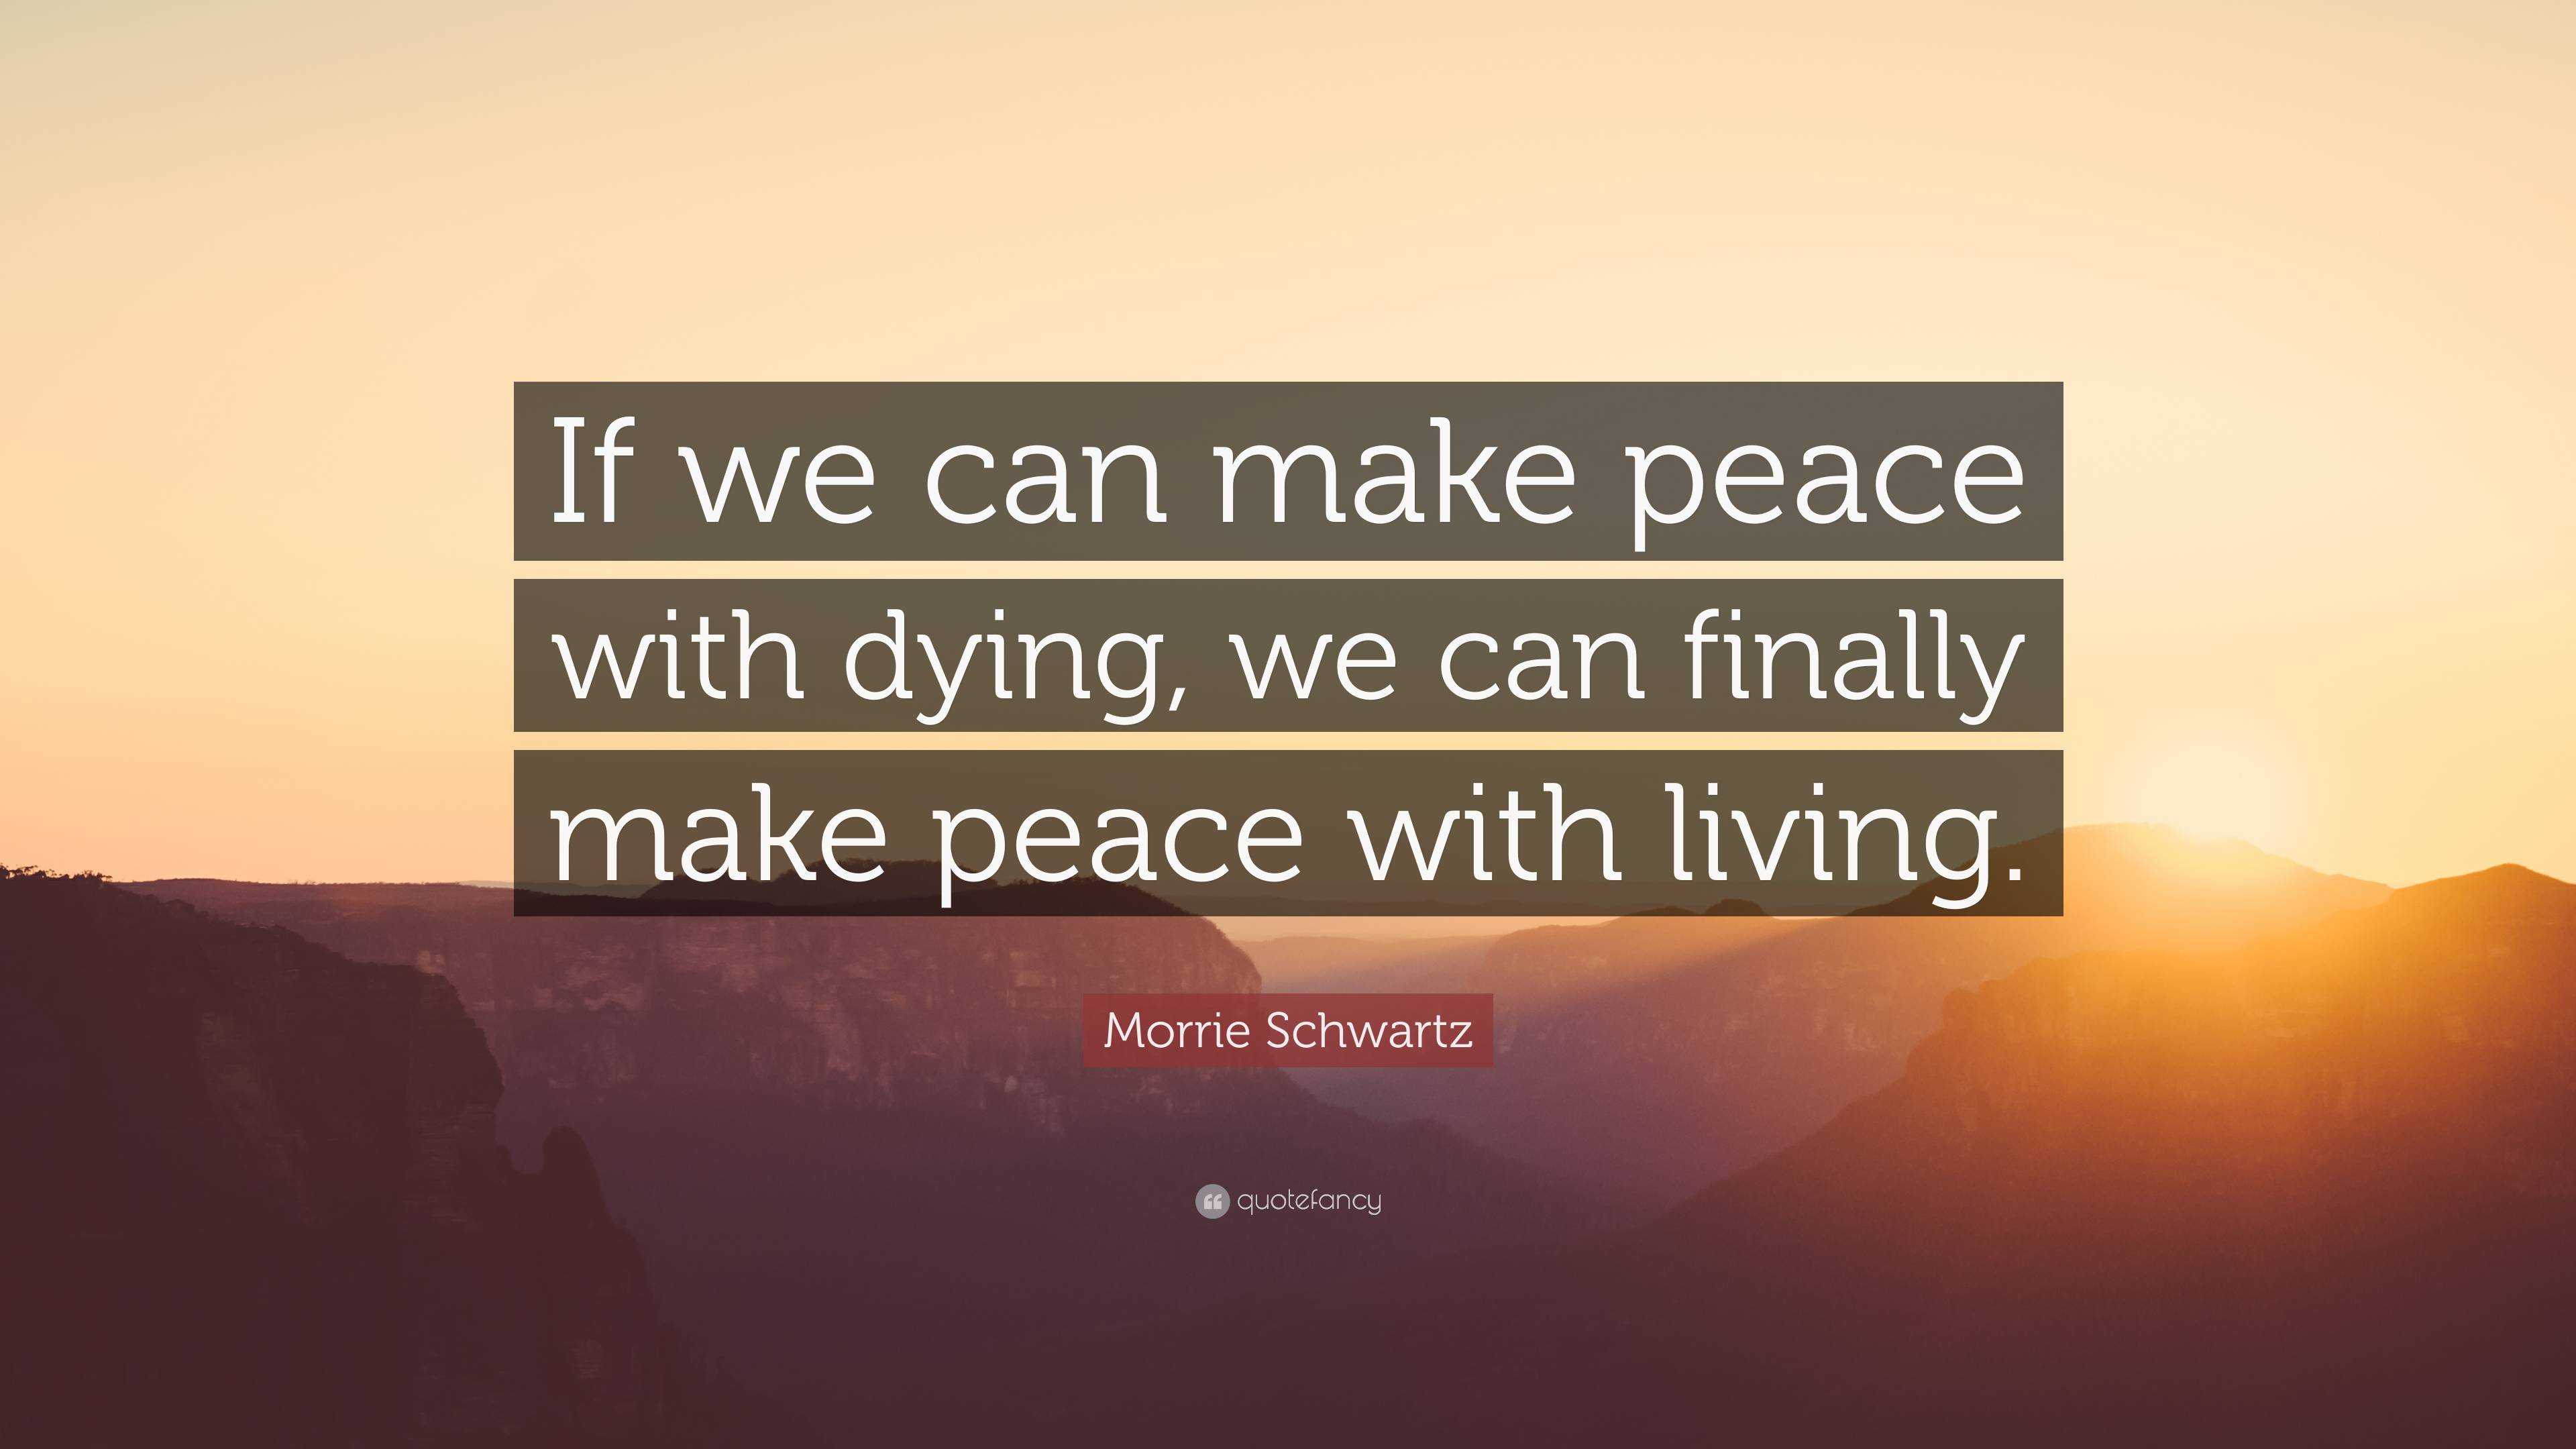 Morrie Schwartz Quote: “If we can make peace with dying, we can finally ...